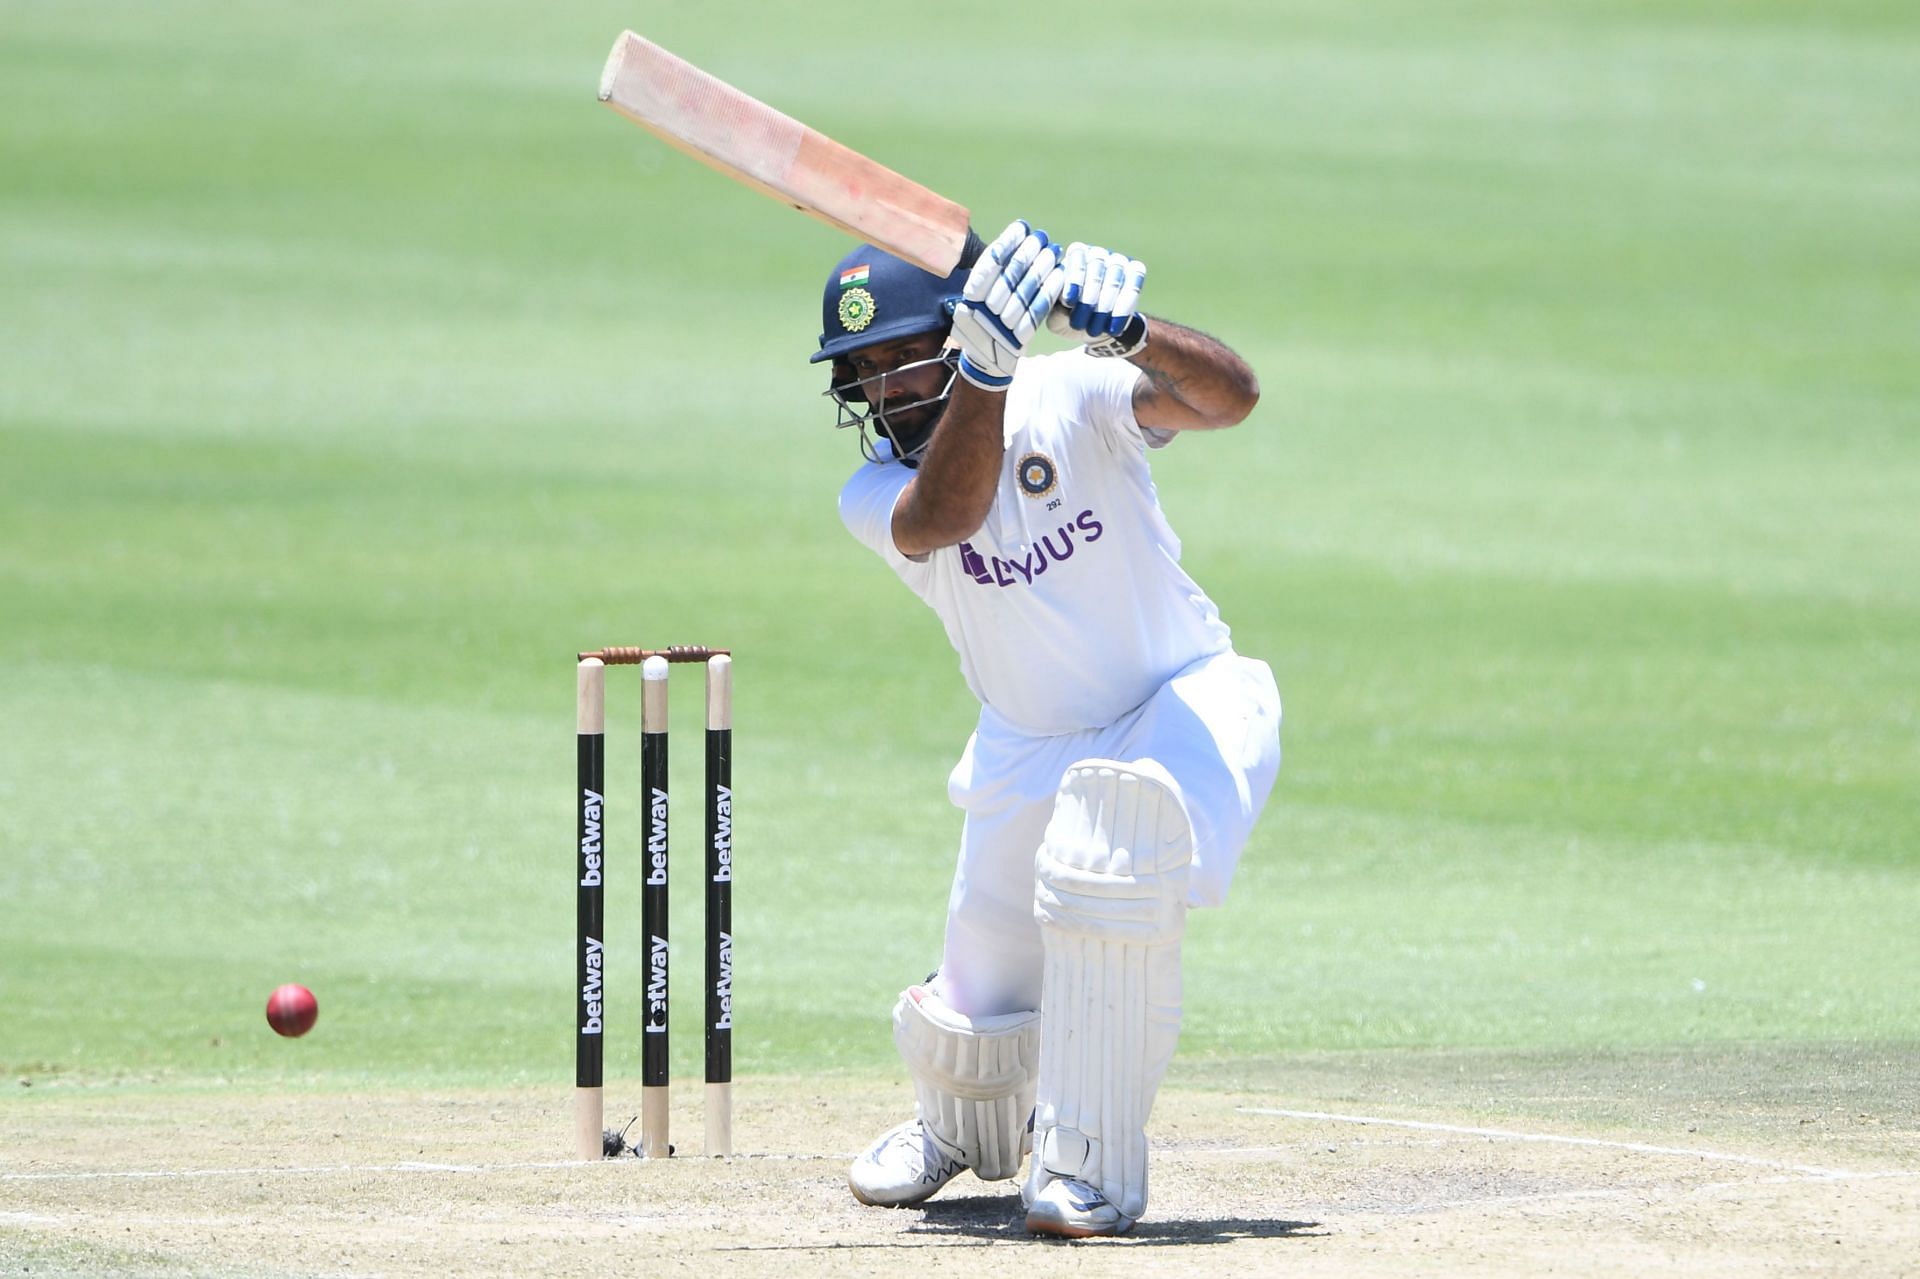 Hanuma Vihari was impressive in the one Test that he played against South Africa.